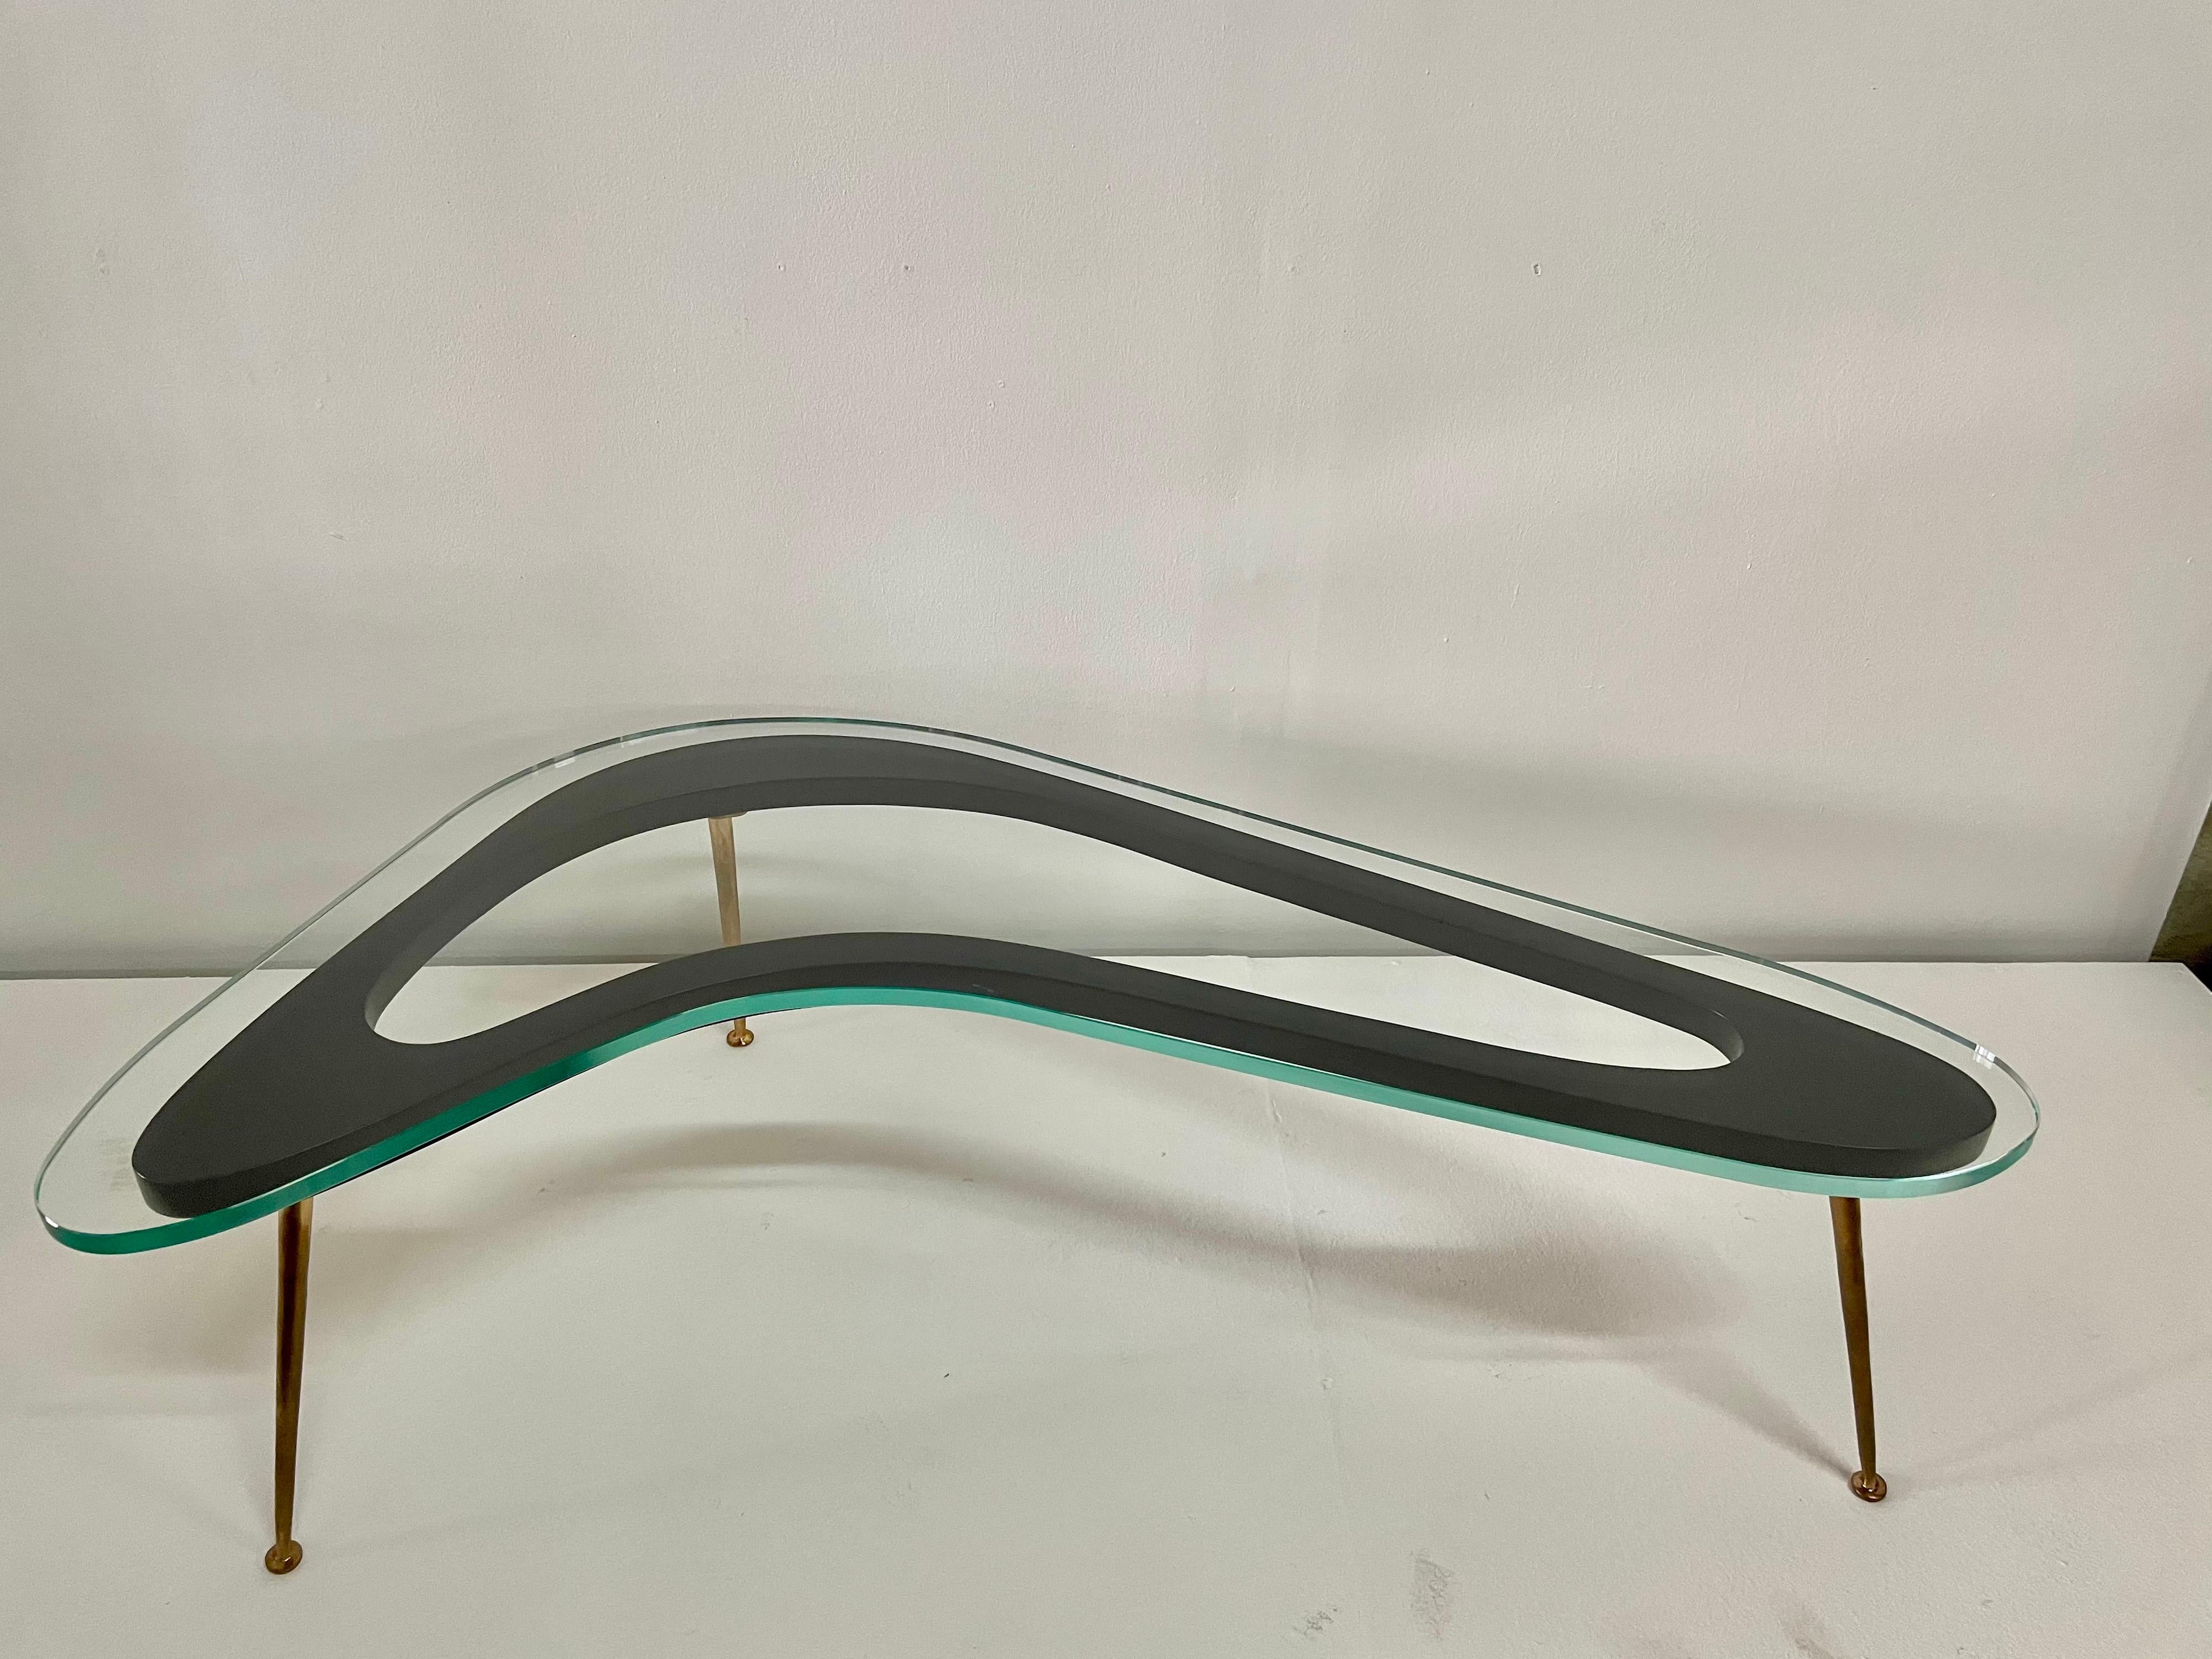 Extra long tapering bronze legs with a stencil cut boomerang top design and a 3/4 inch glass top. This is truly the best of Italian midcentury design. Lacquered wood in matte black under a 3/4 inch thick glass top and sleek and solid bronze legs.